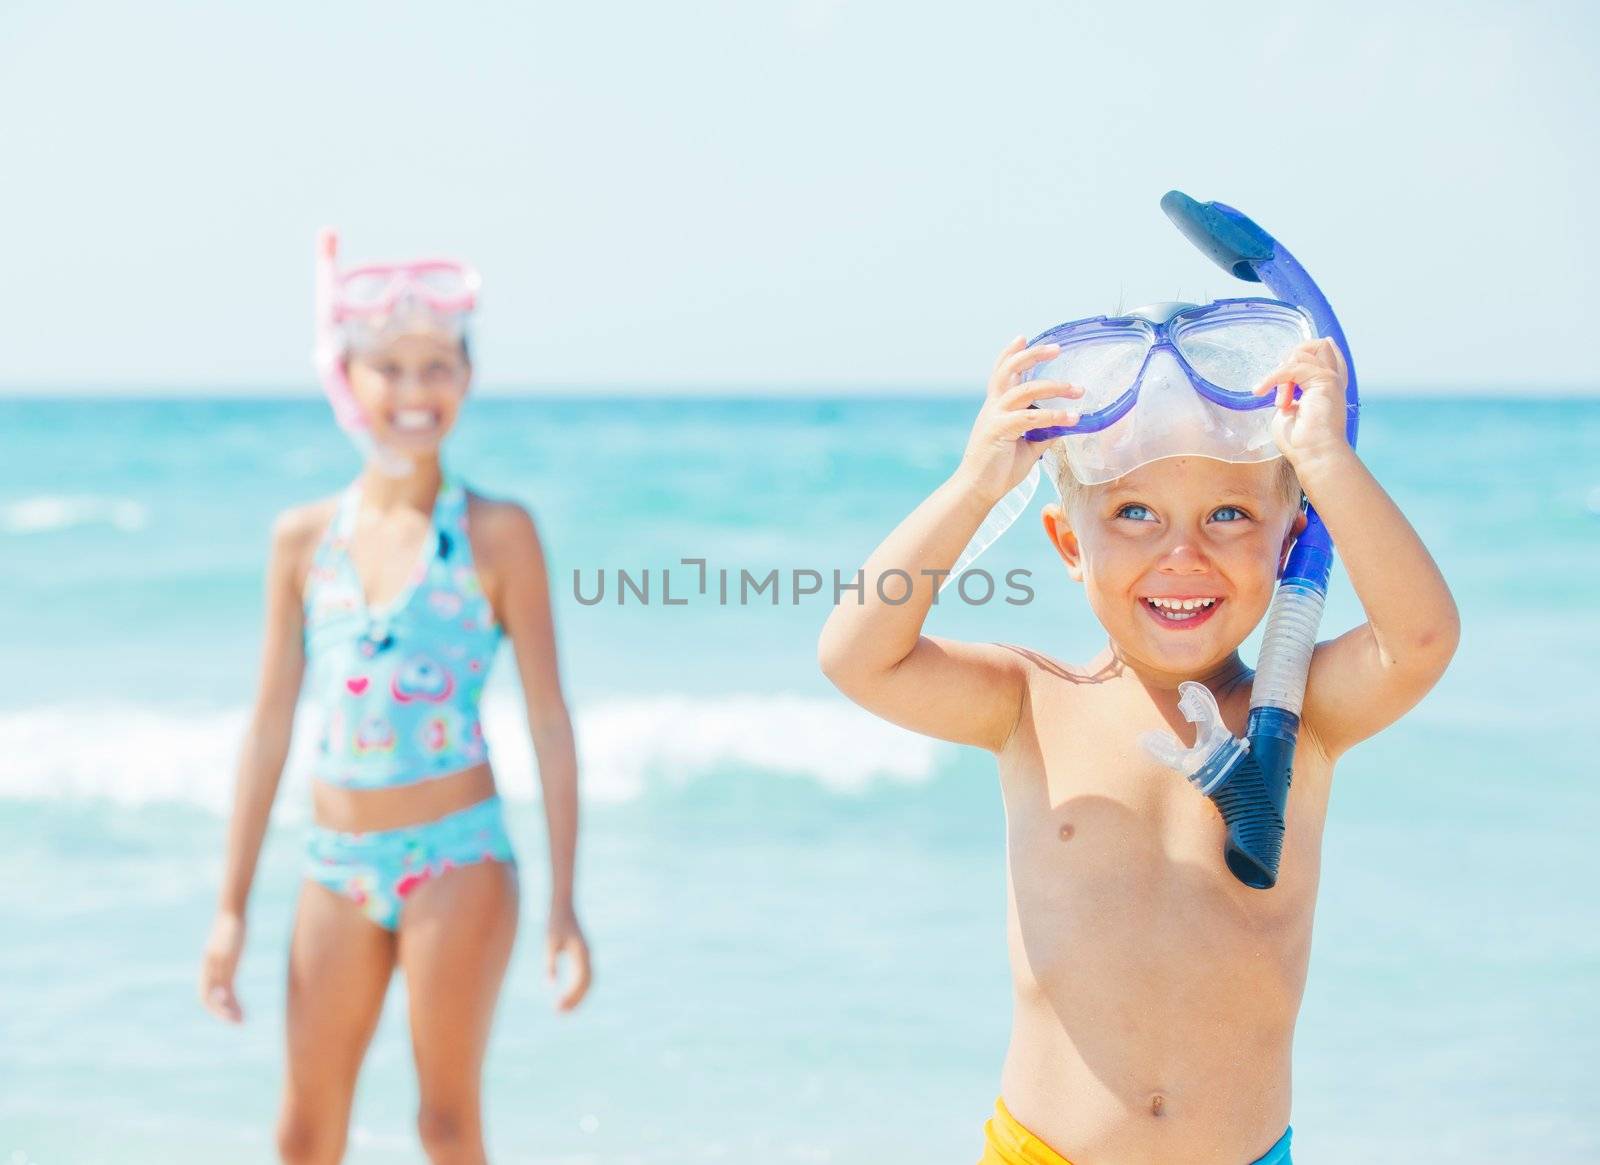 Happy young boy with snorkeling equipment on sandy tropical beach, his sister background.